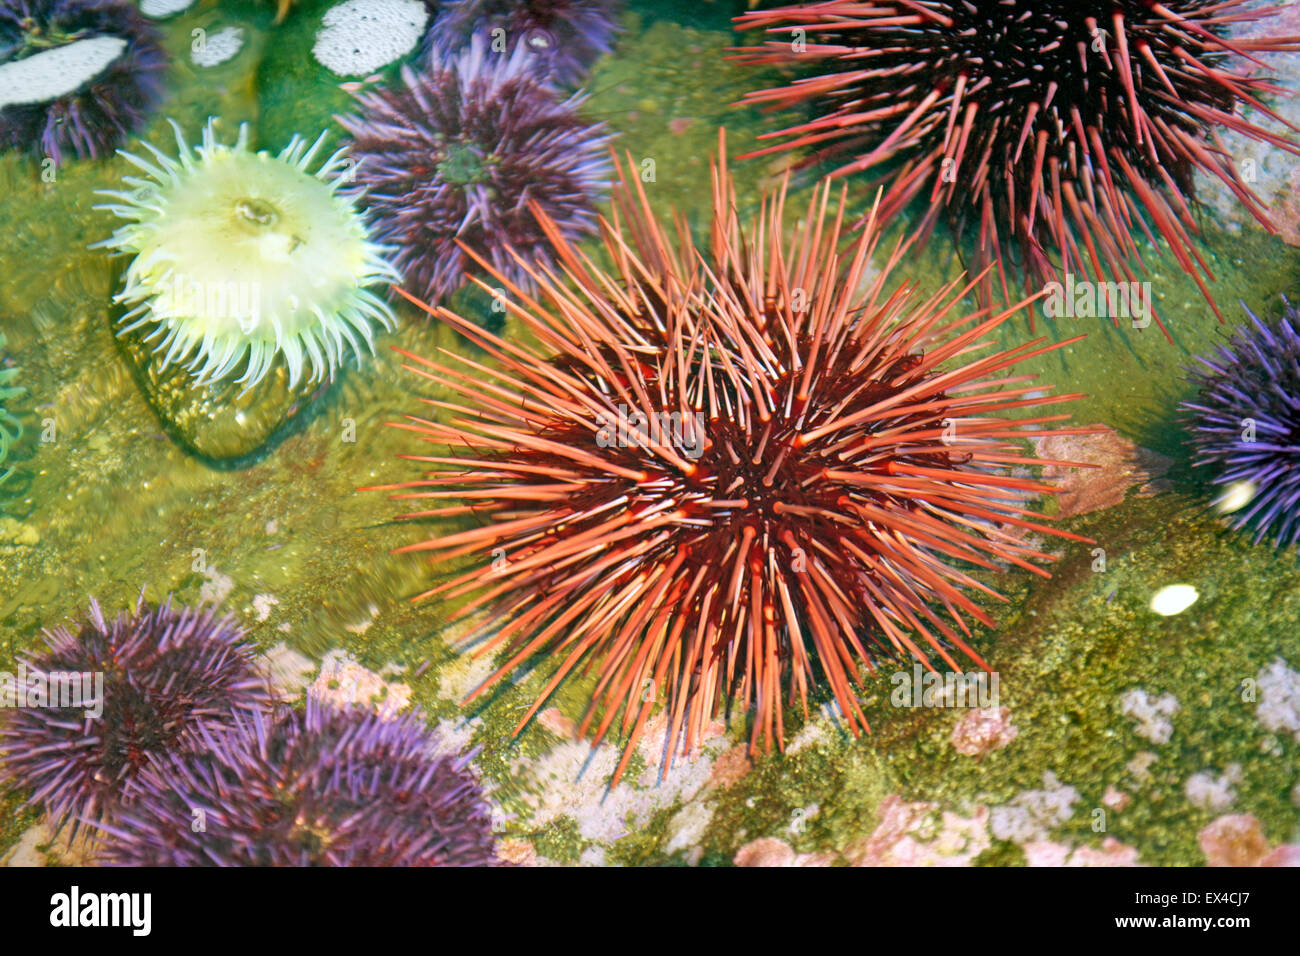 Sea urchins and sea anemones in a tidal pool along the Oregon Pacific Coast. Stock Photo